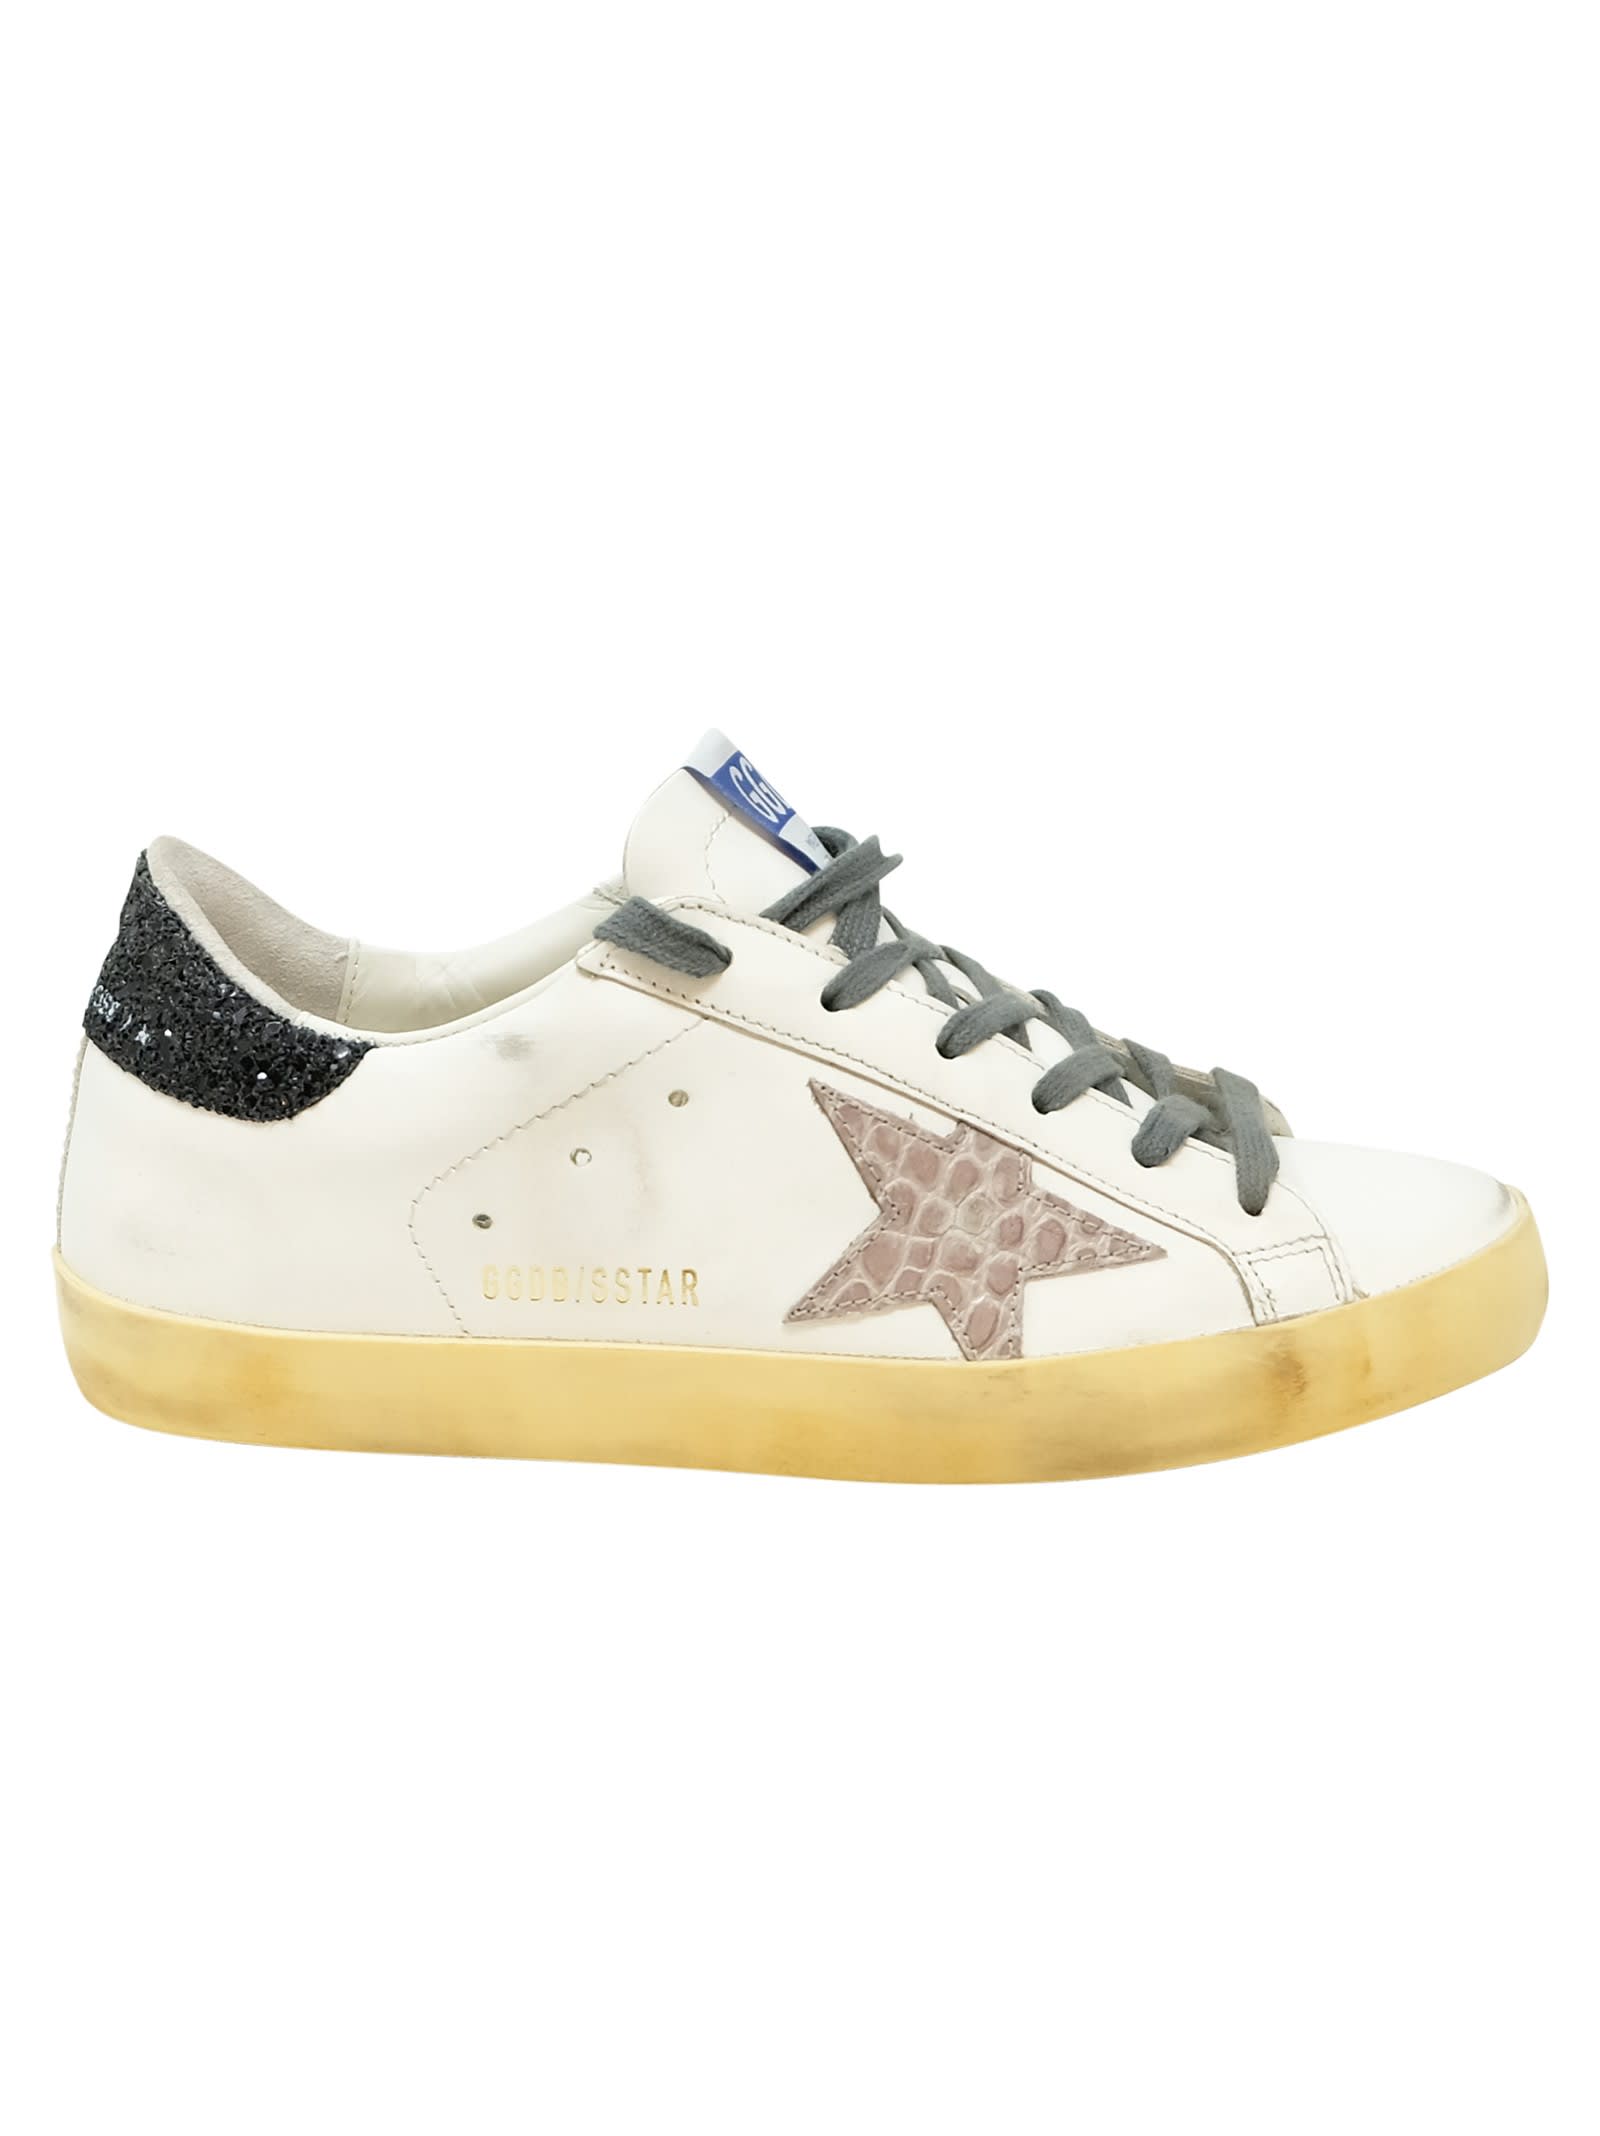 Golden Goose Grey/black Cocco Printed Leather Superstar Sneakers